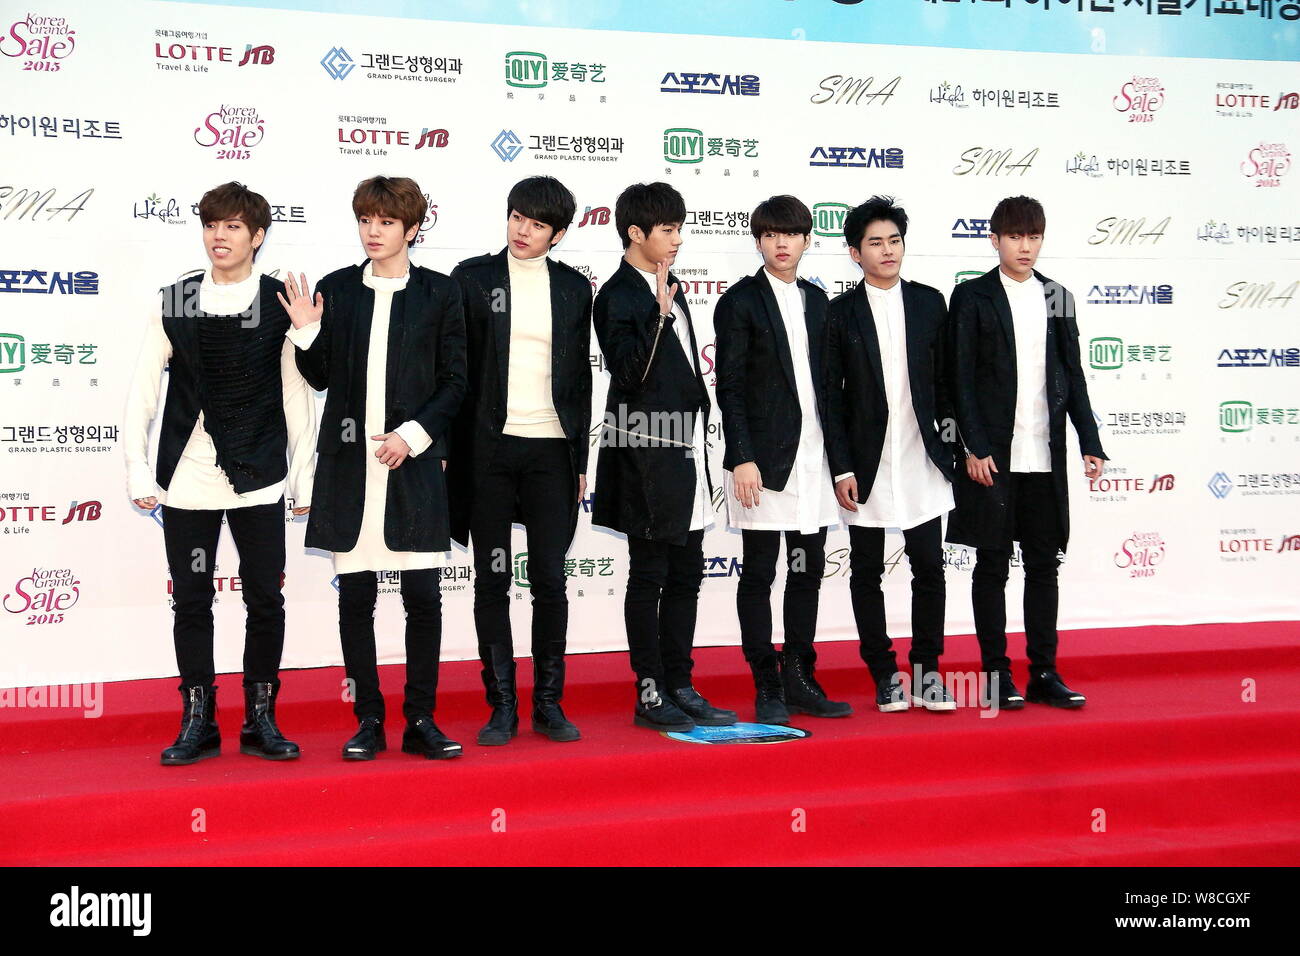 Members of South Korean K-pop group Infinite pose on the red carpet as they arrive for the 24th Seoul Music Awards in Seoul, South Korea, 22 January 2 Stock Photo - Alamy